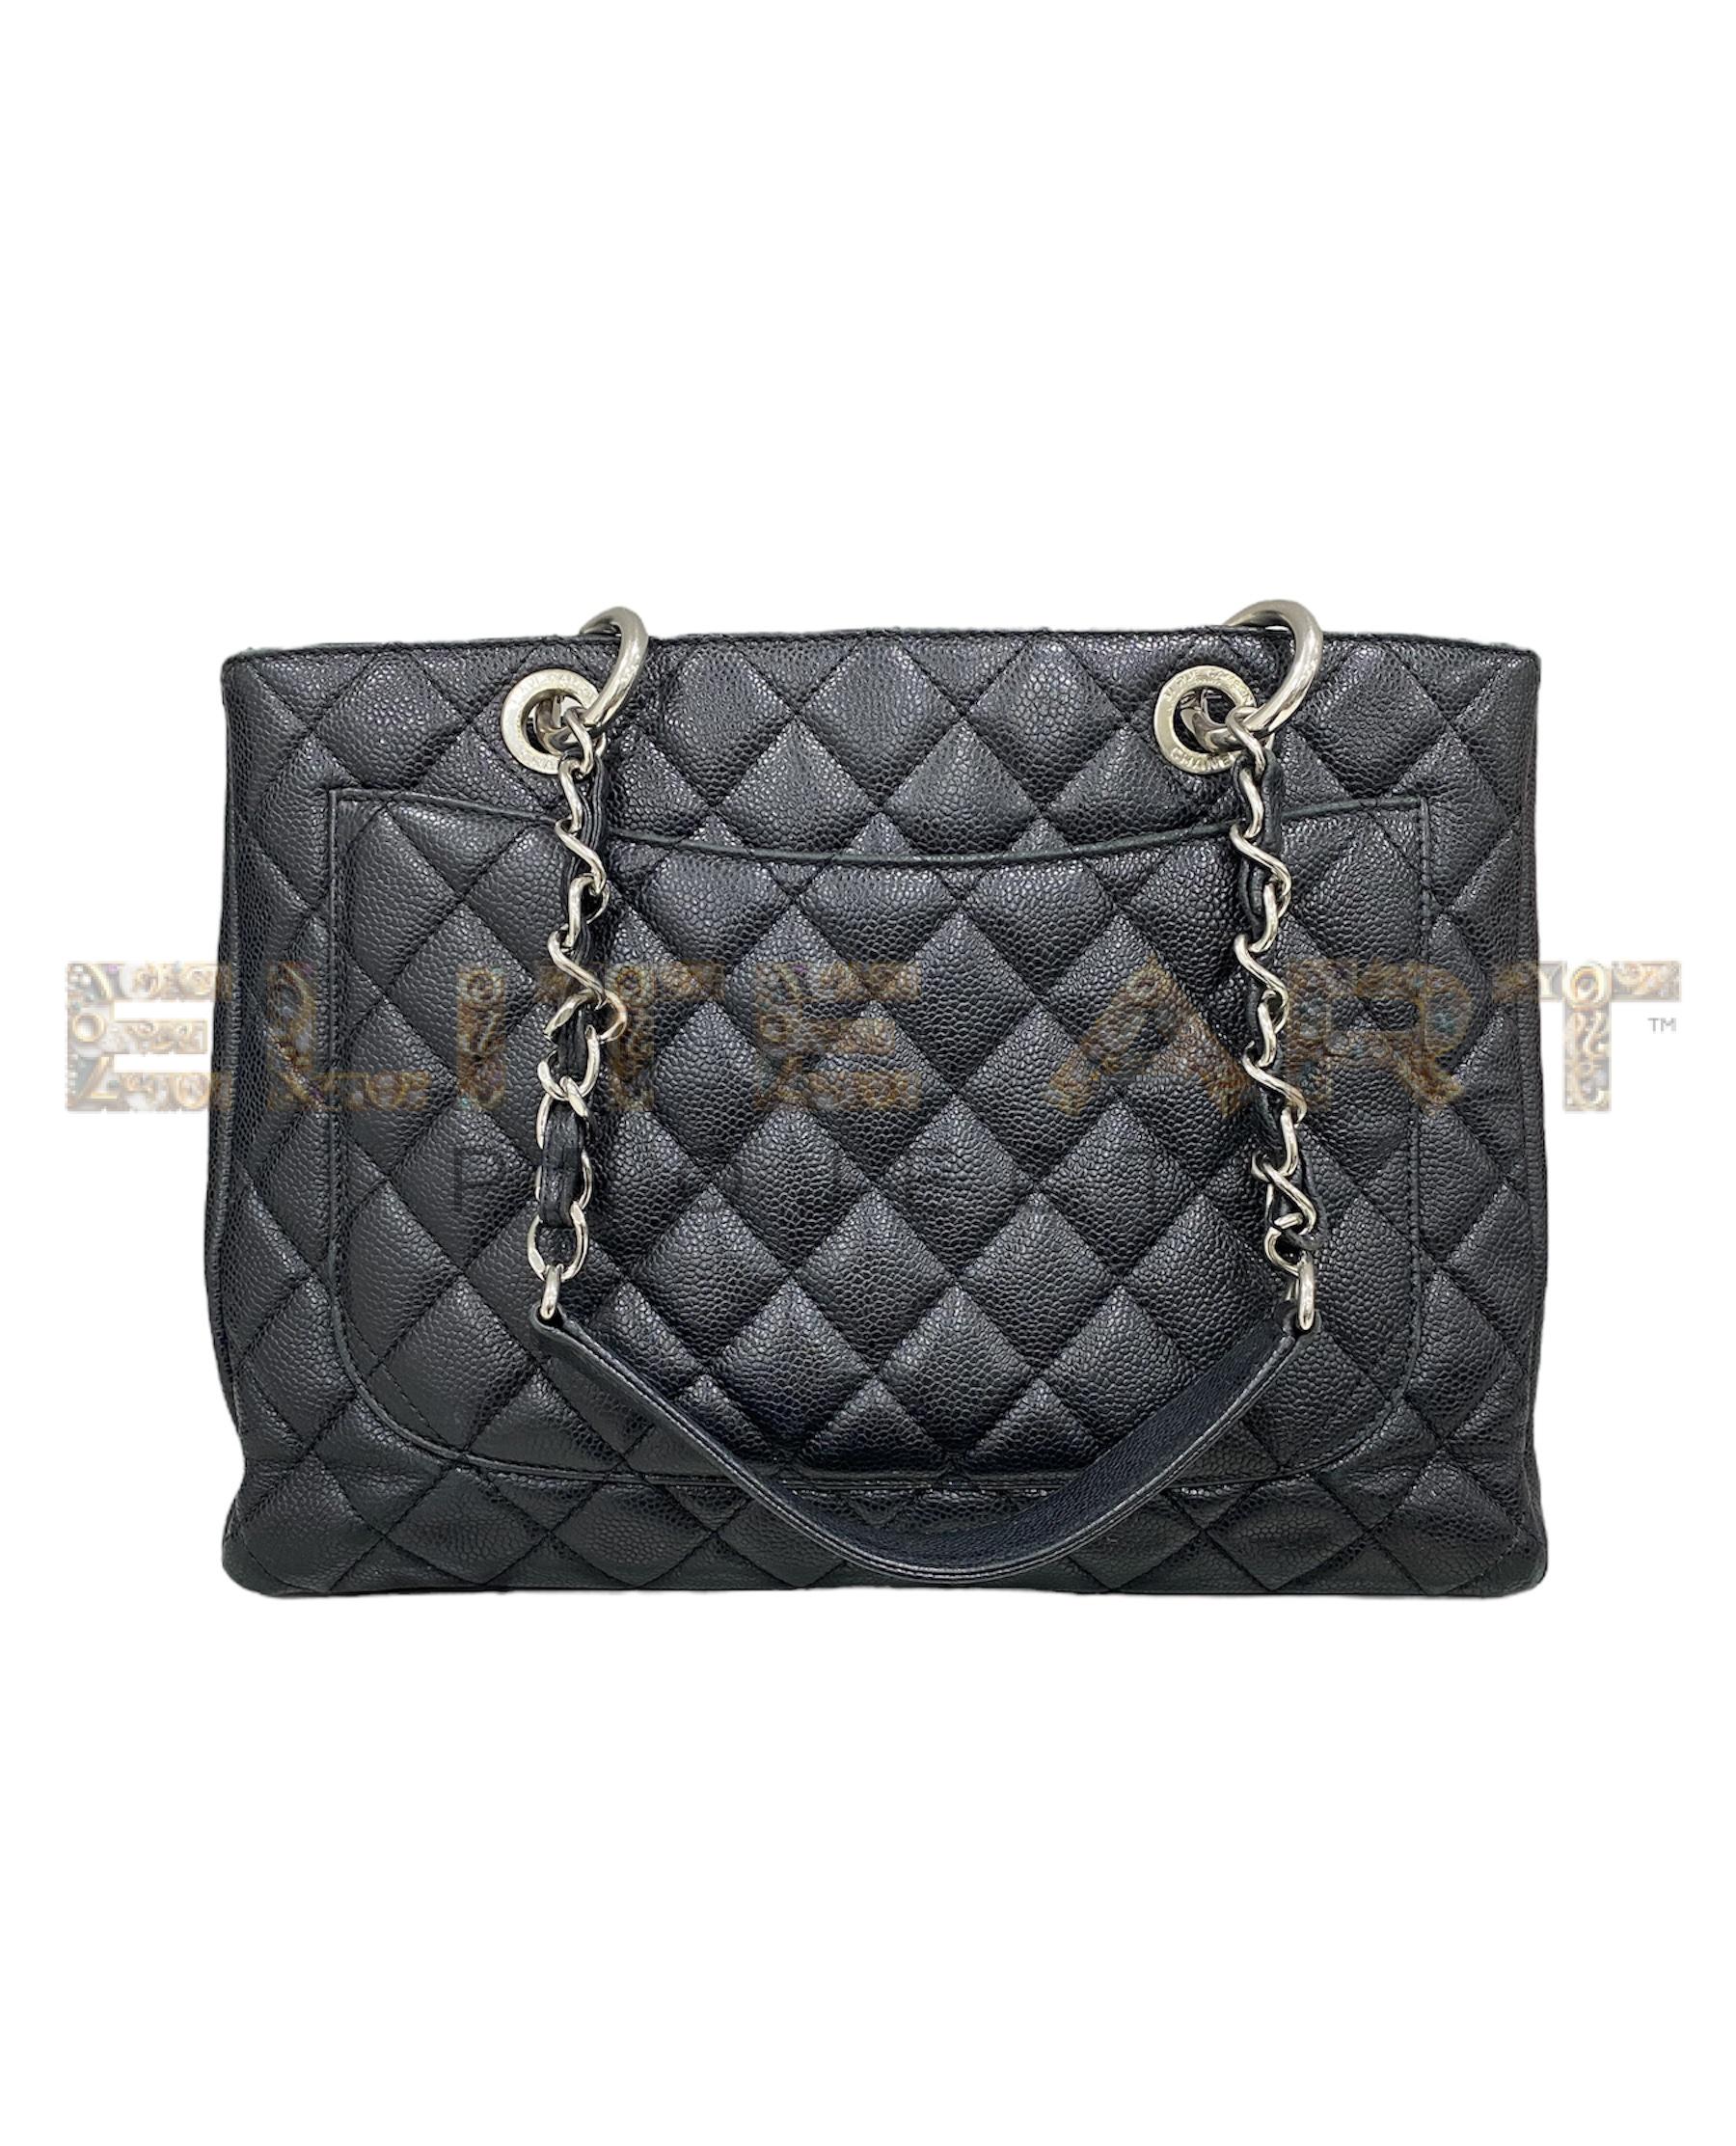 ELS Fashion TV, Elite Art Projects, Chanel, bag, GST, black caviar leather, silver-tone hardware, central zip pocket, spacious interior, functional, stylish, good condition.